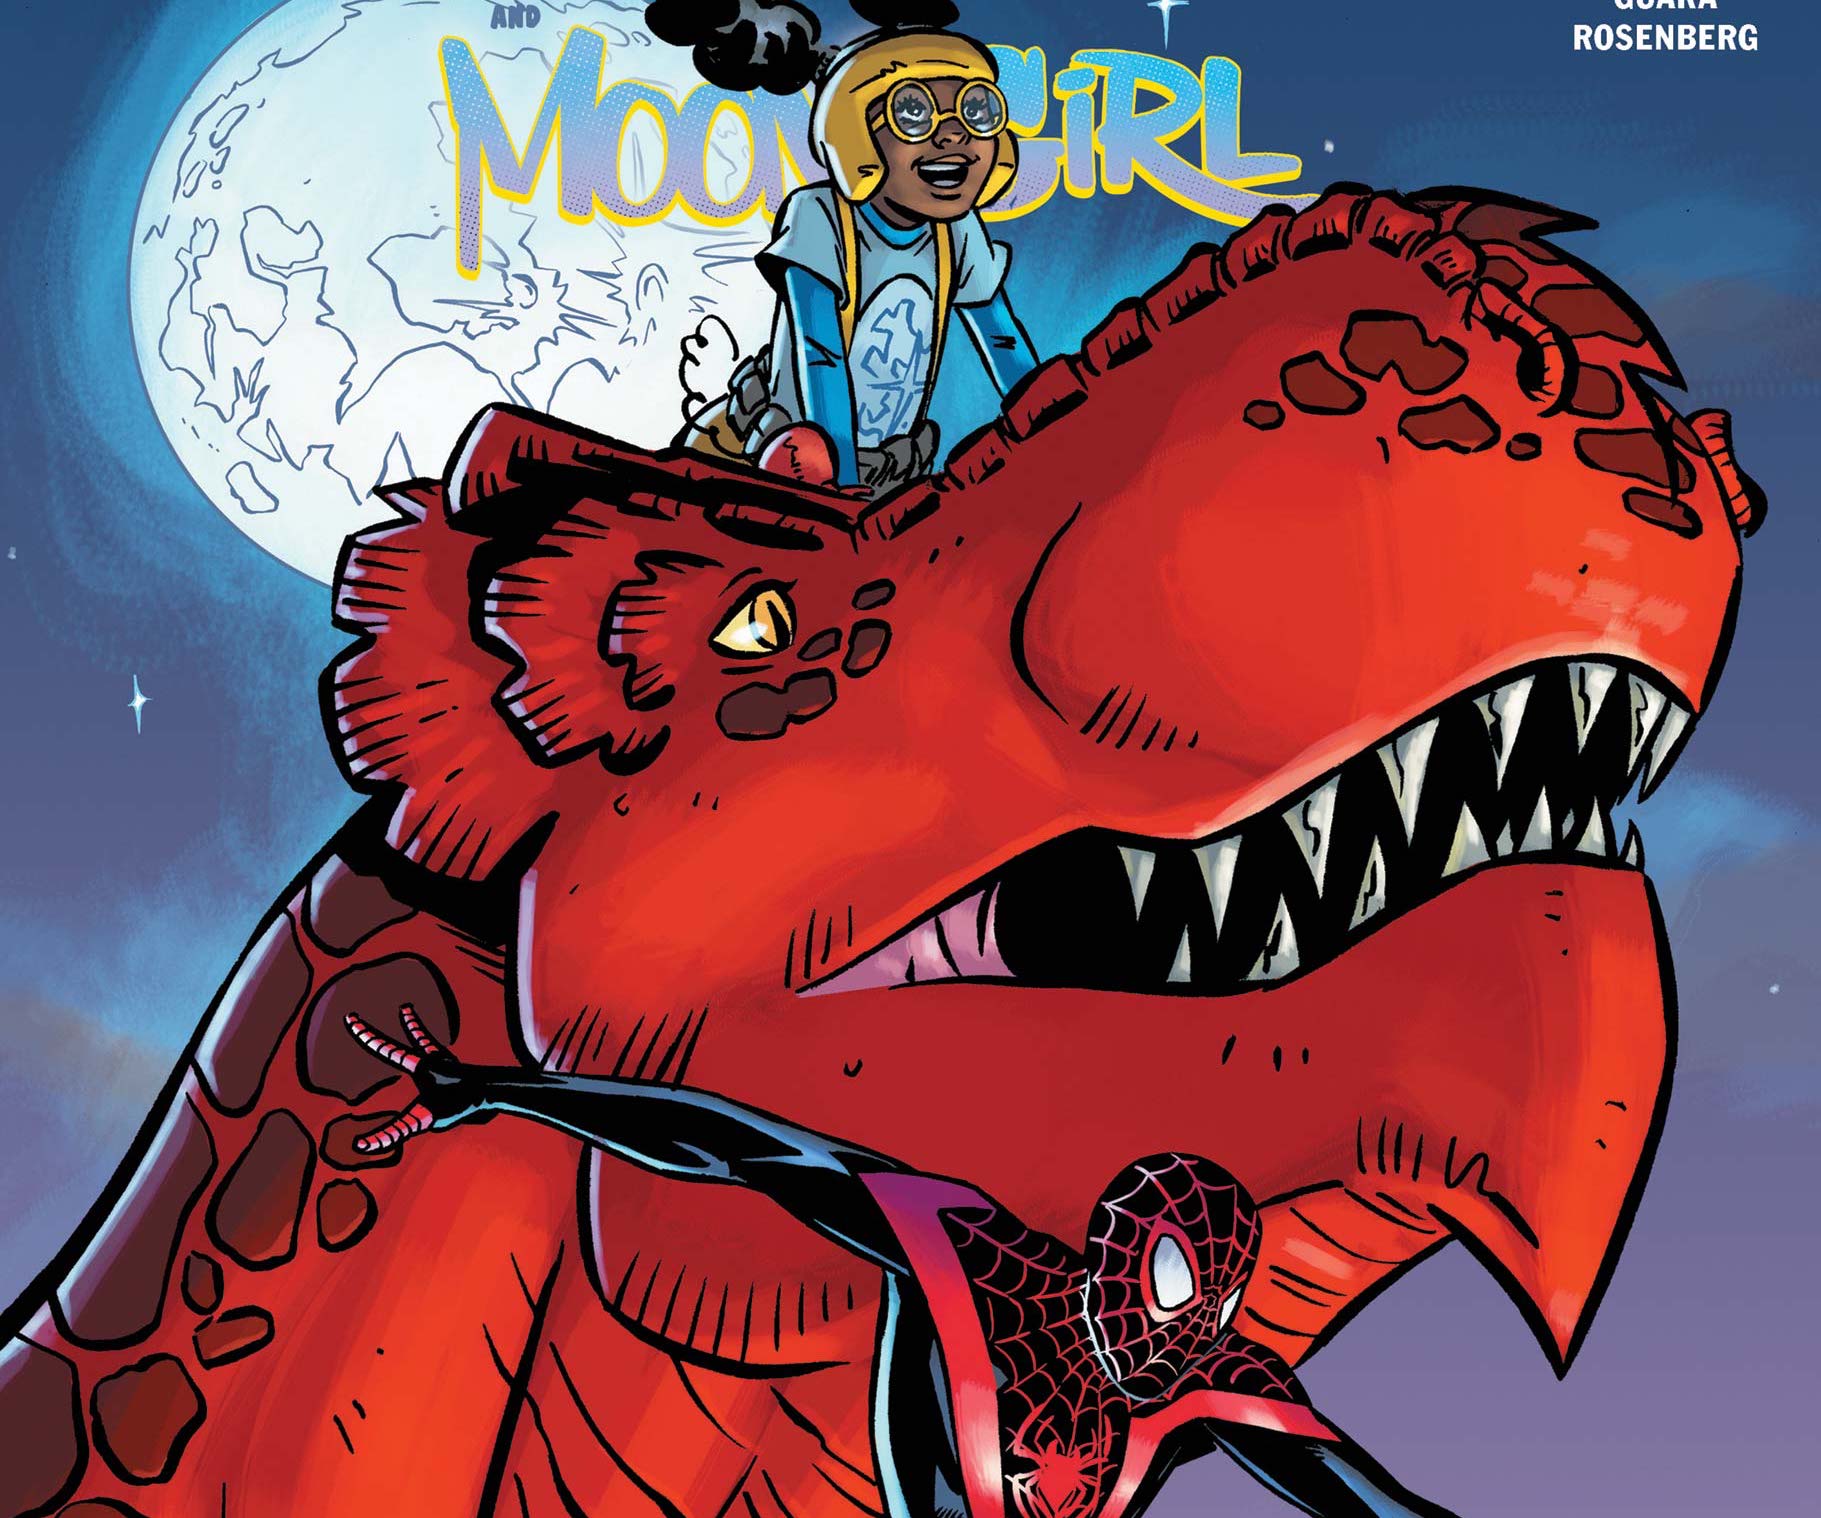 'Miles Morales and Moon Girl' #1 captures Lunella perfectly